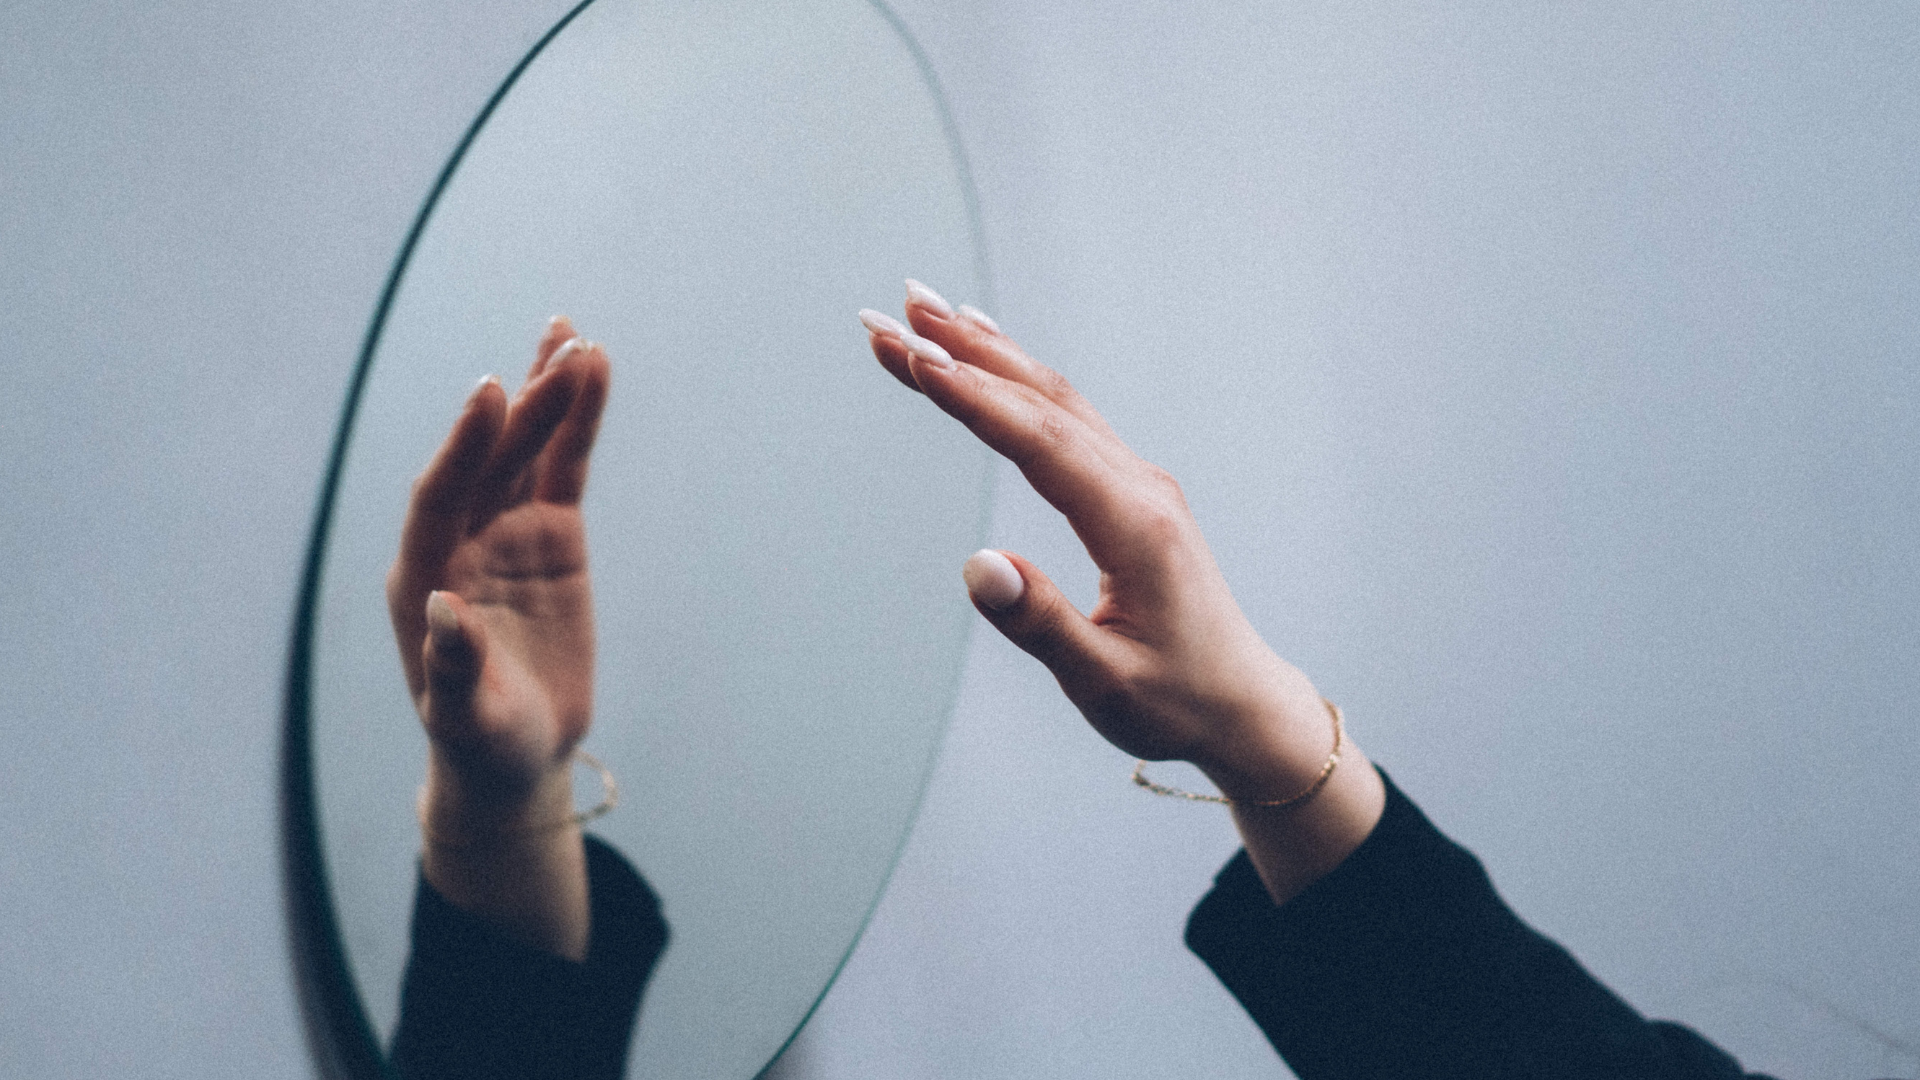 circle mirror hanging on a grey wall and a person's hand reaching up to the mirror